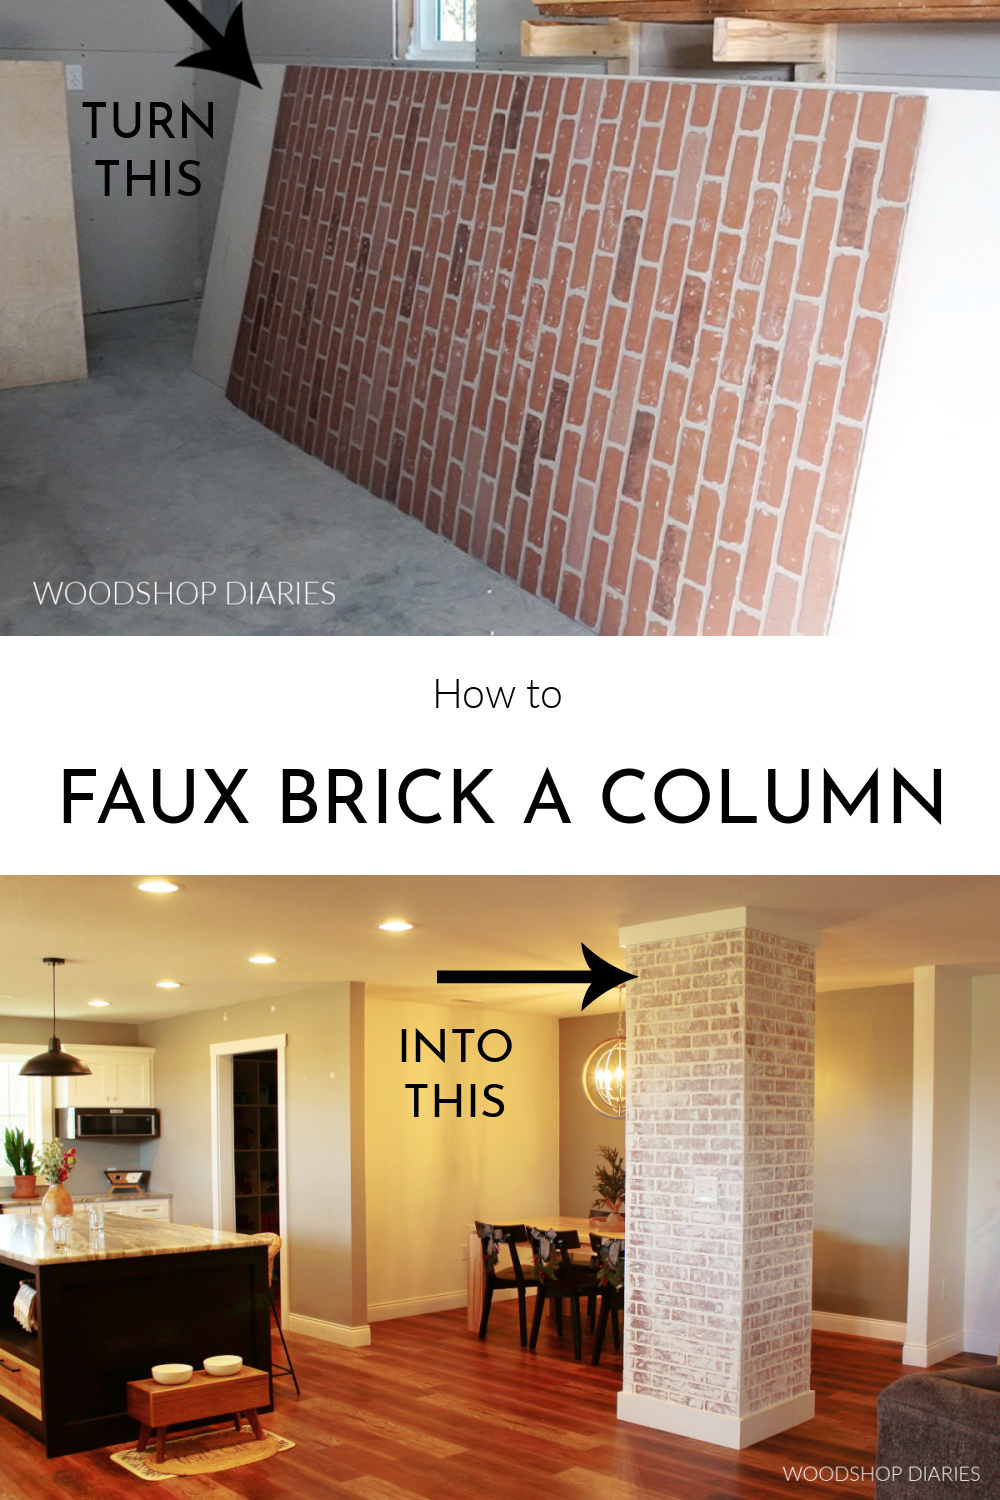 Pinterest collage image showing brick paneling at top and finished column at bottom